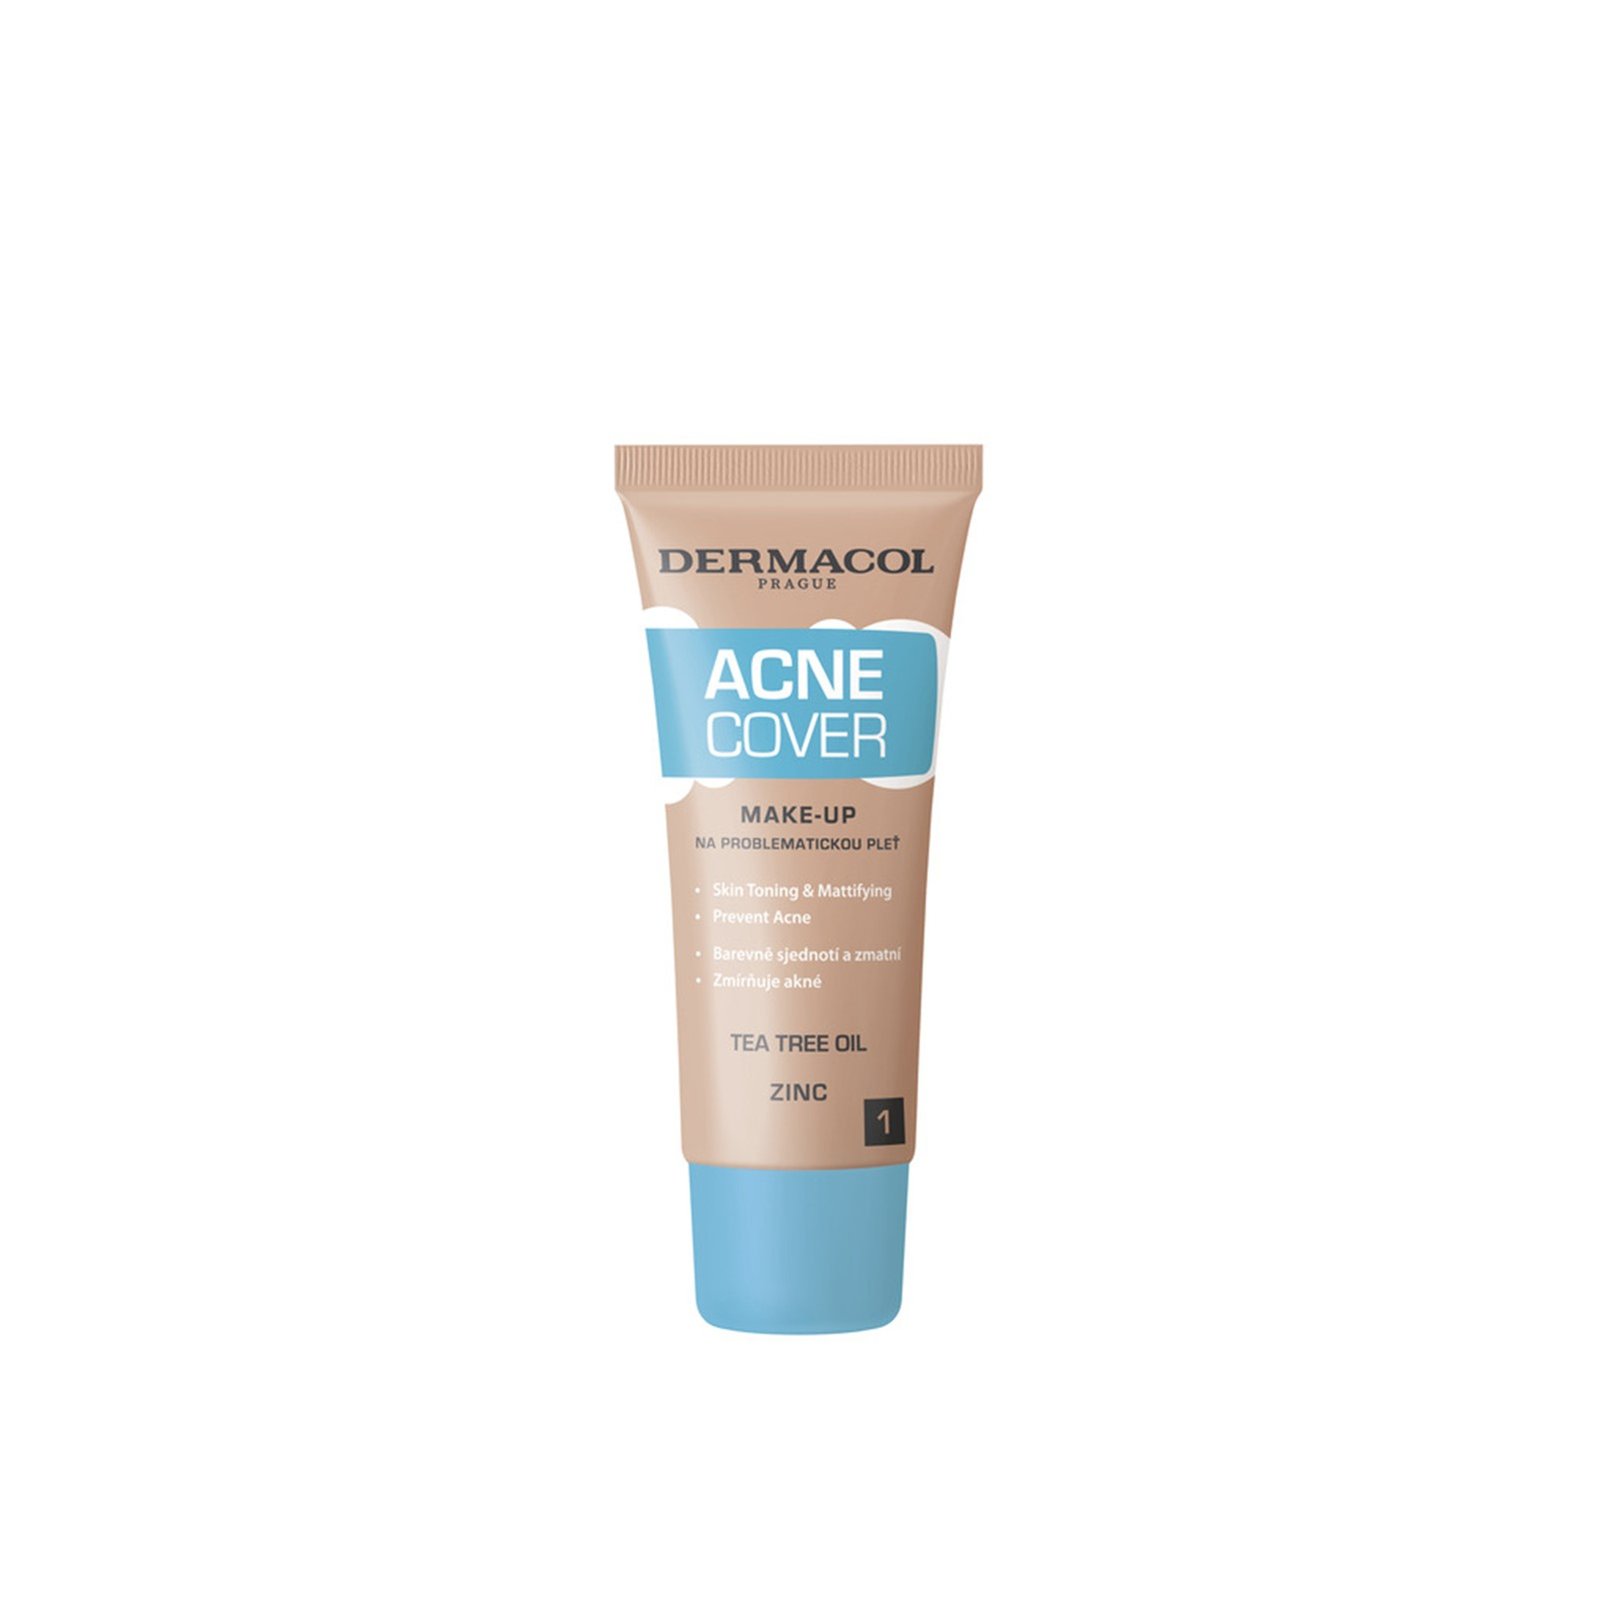 Dermacol Acnecover Make-Up 1 30ml